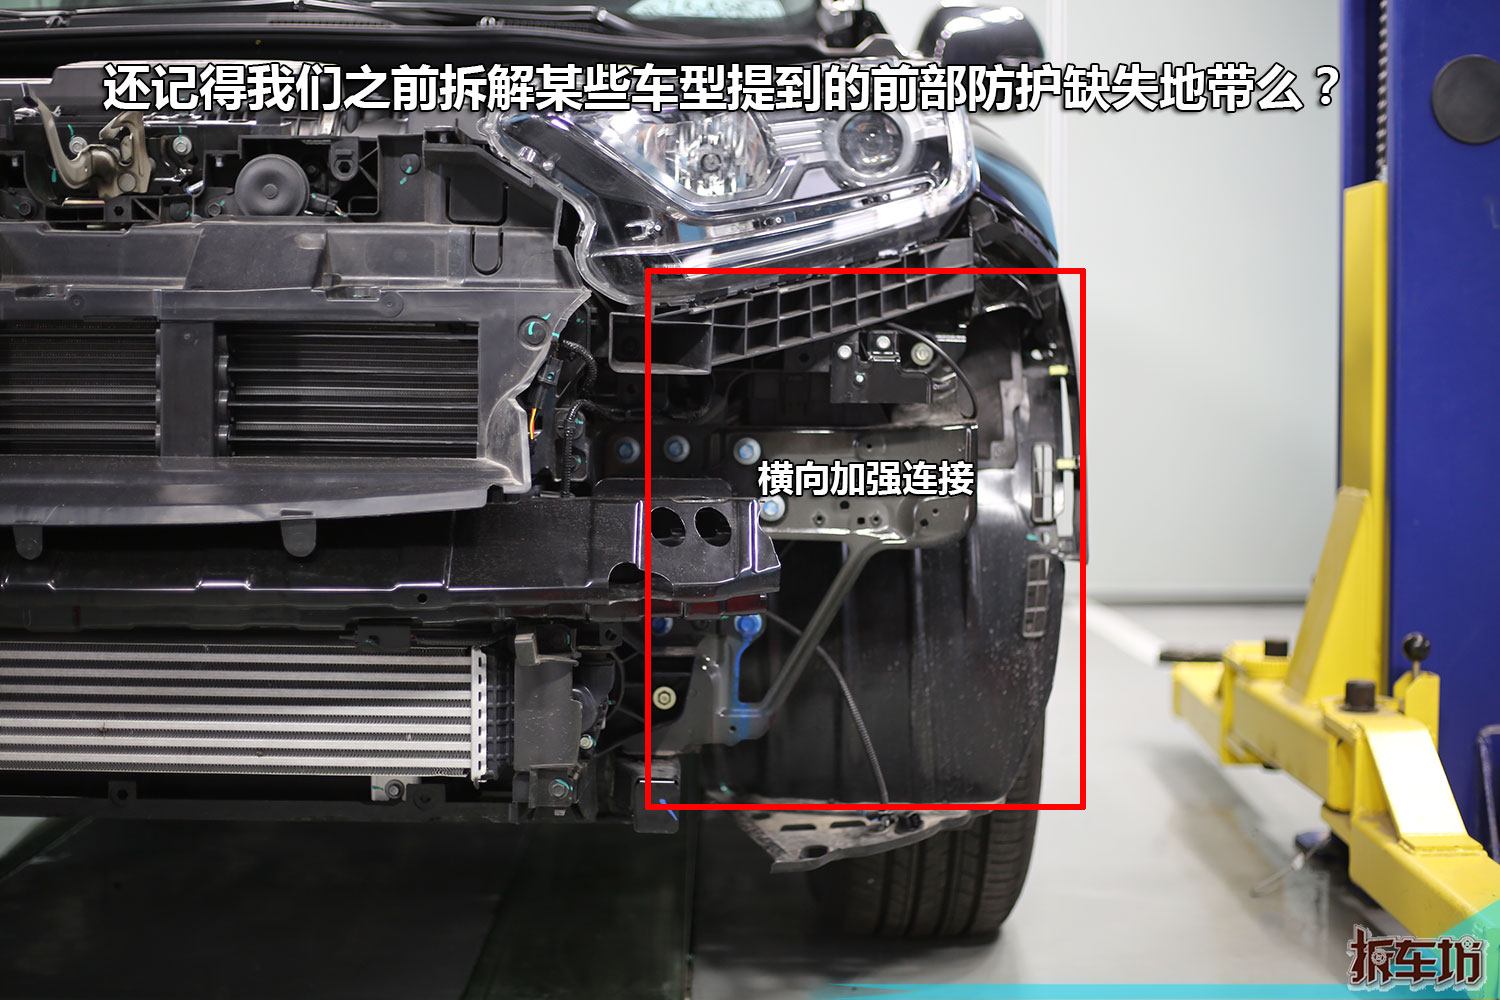 There are not many enhancements, there are many reductions, and the new CR-V dismantling performance makes people look